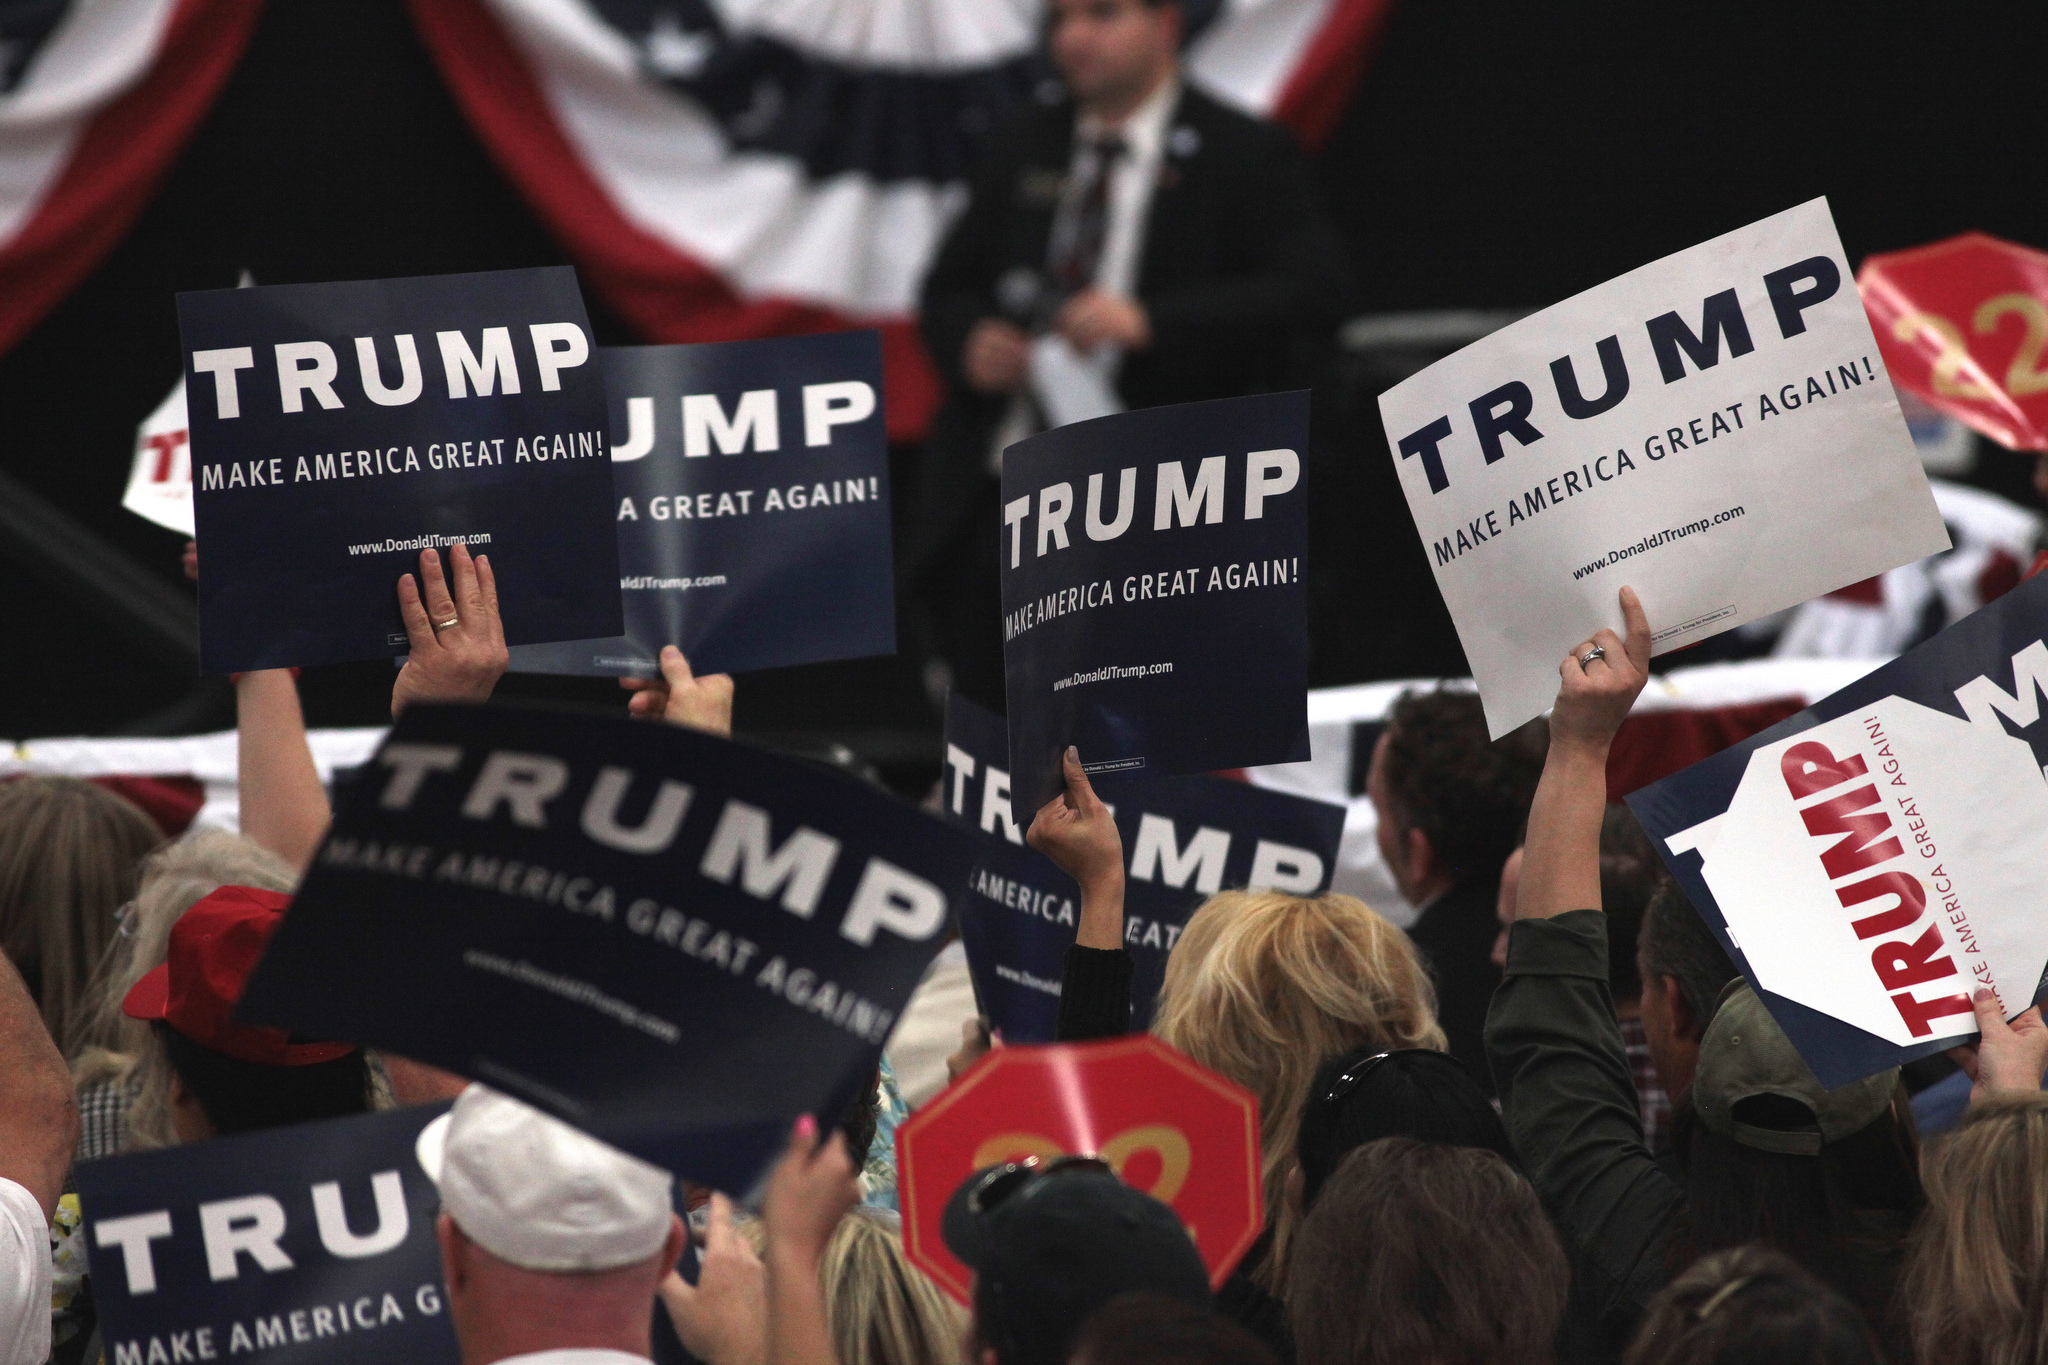 A Trump rally in Las Vegas. Photo credit: flickr user Gage Skidmore https://www.flickr.com/photos/gageskidmore/25218962886/ Creative Commons license: https://creativecommons.org/licenses/by-sa/2.0/